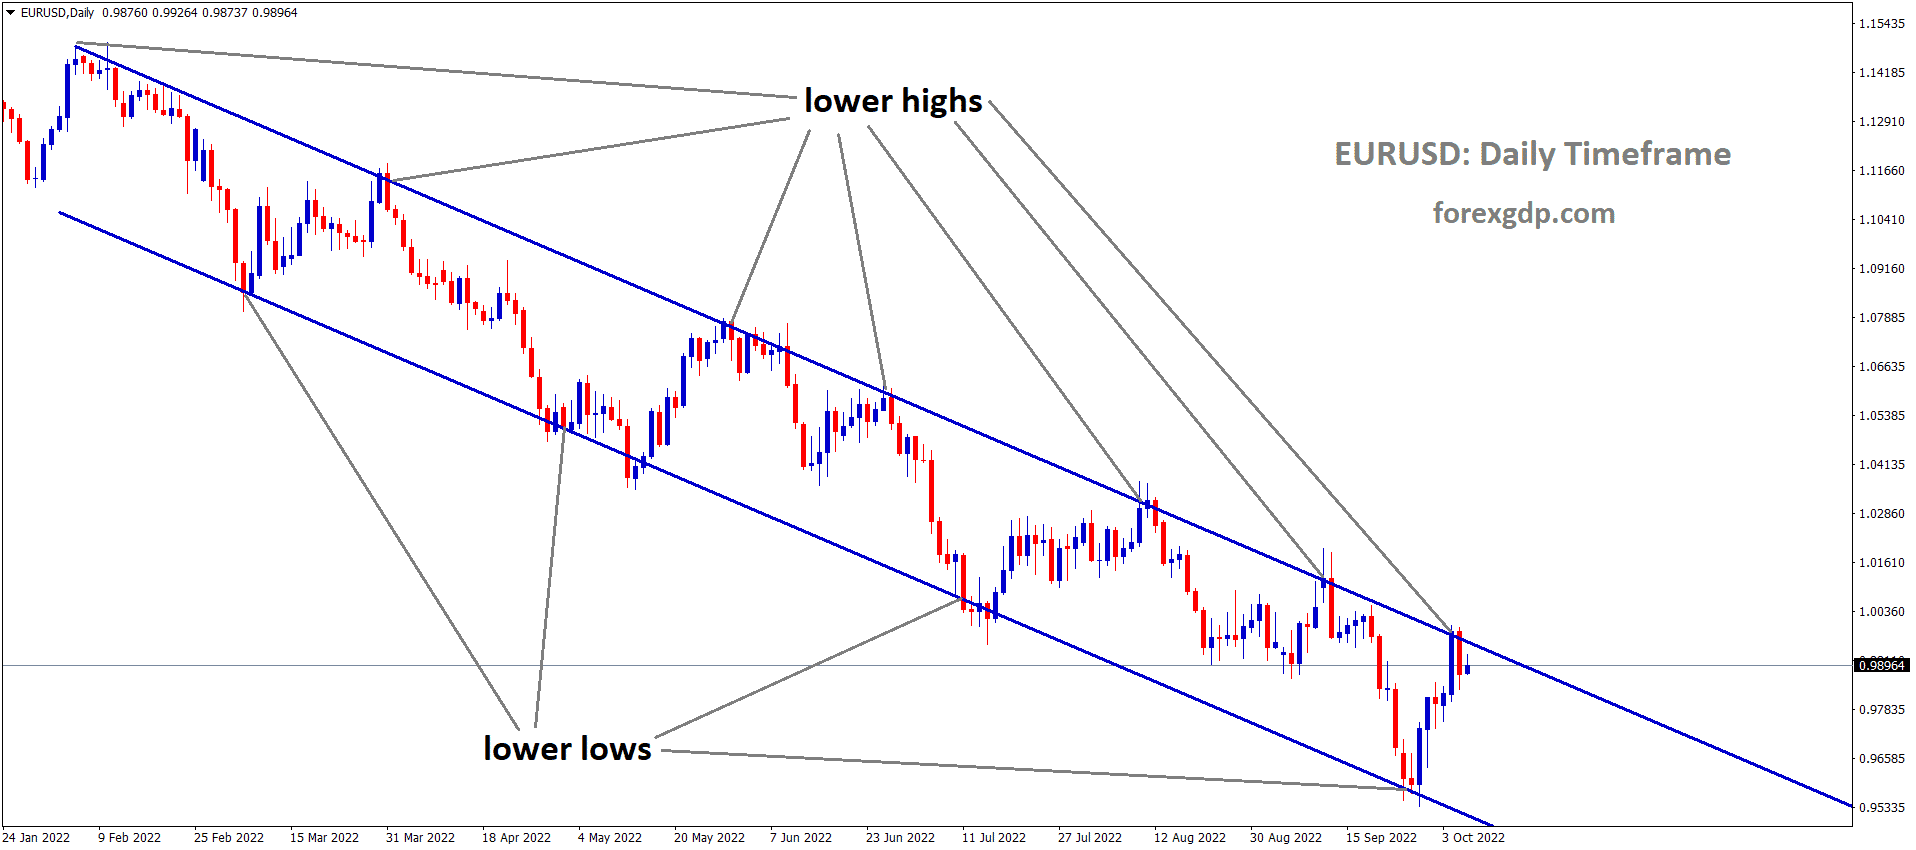 EURUSD is moving in the descending channel and the market has reached the Lower high area of the channel